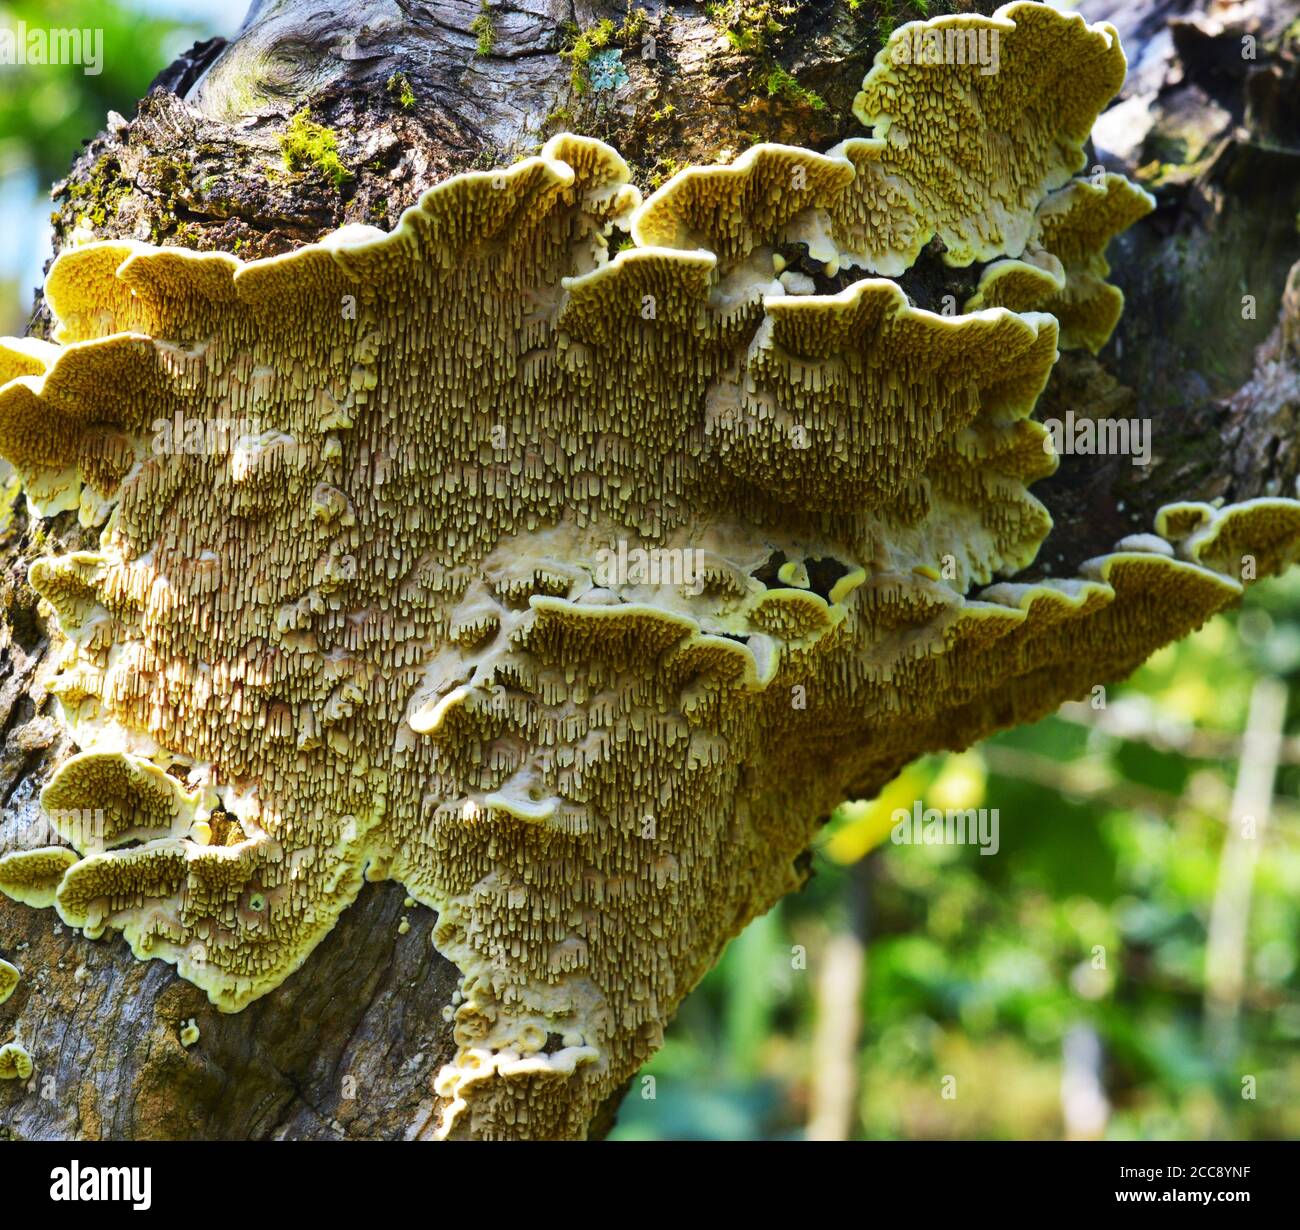 fungus on a tree bark with its lower side having a nice pattern. Fungi that decompose tree trunks can conjure up real works of art in wood. In nature, Stock Photo